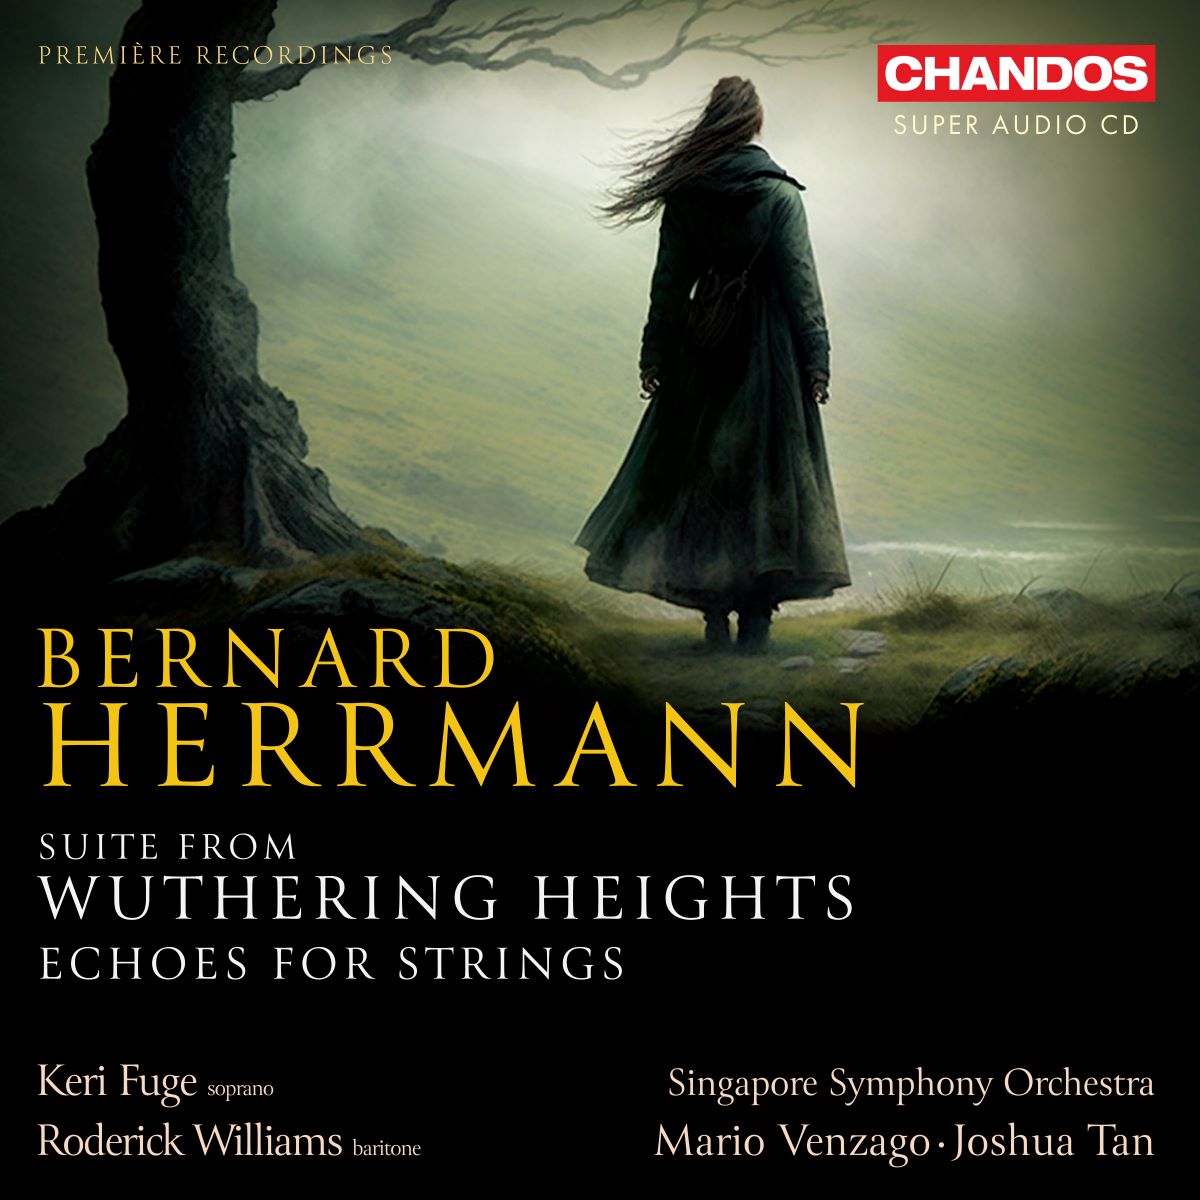 🌟Herrmann: Suite from Wuthering; Echoes for Strings is officially OUT TODAY! 🎉 Immerse yourself in a mesmerizing performance by @SingaporeSymph with Mario Venzago and Joshua Tan, featuring @KeriFuge and @RGCWbaritone as Cathy and Heathcliff 💿✨ 👉tinyurl.com/4x9d7ph3?utm_c…